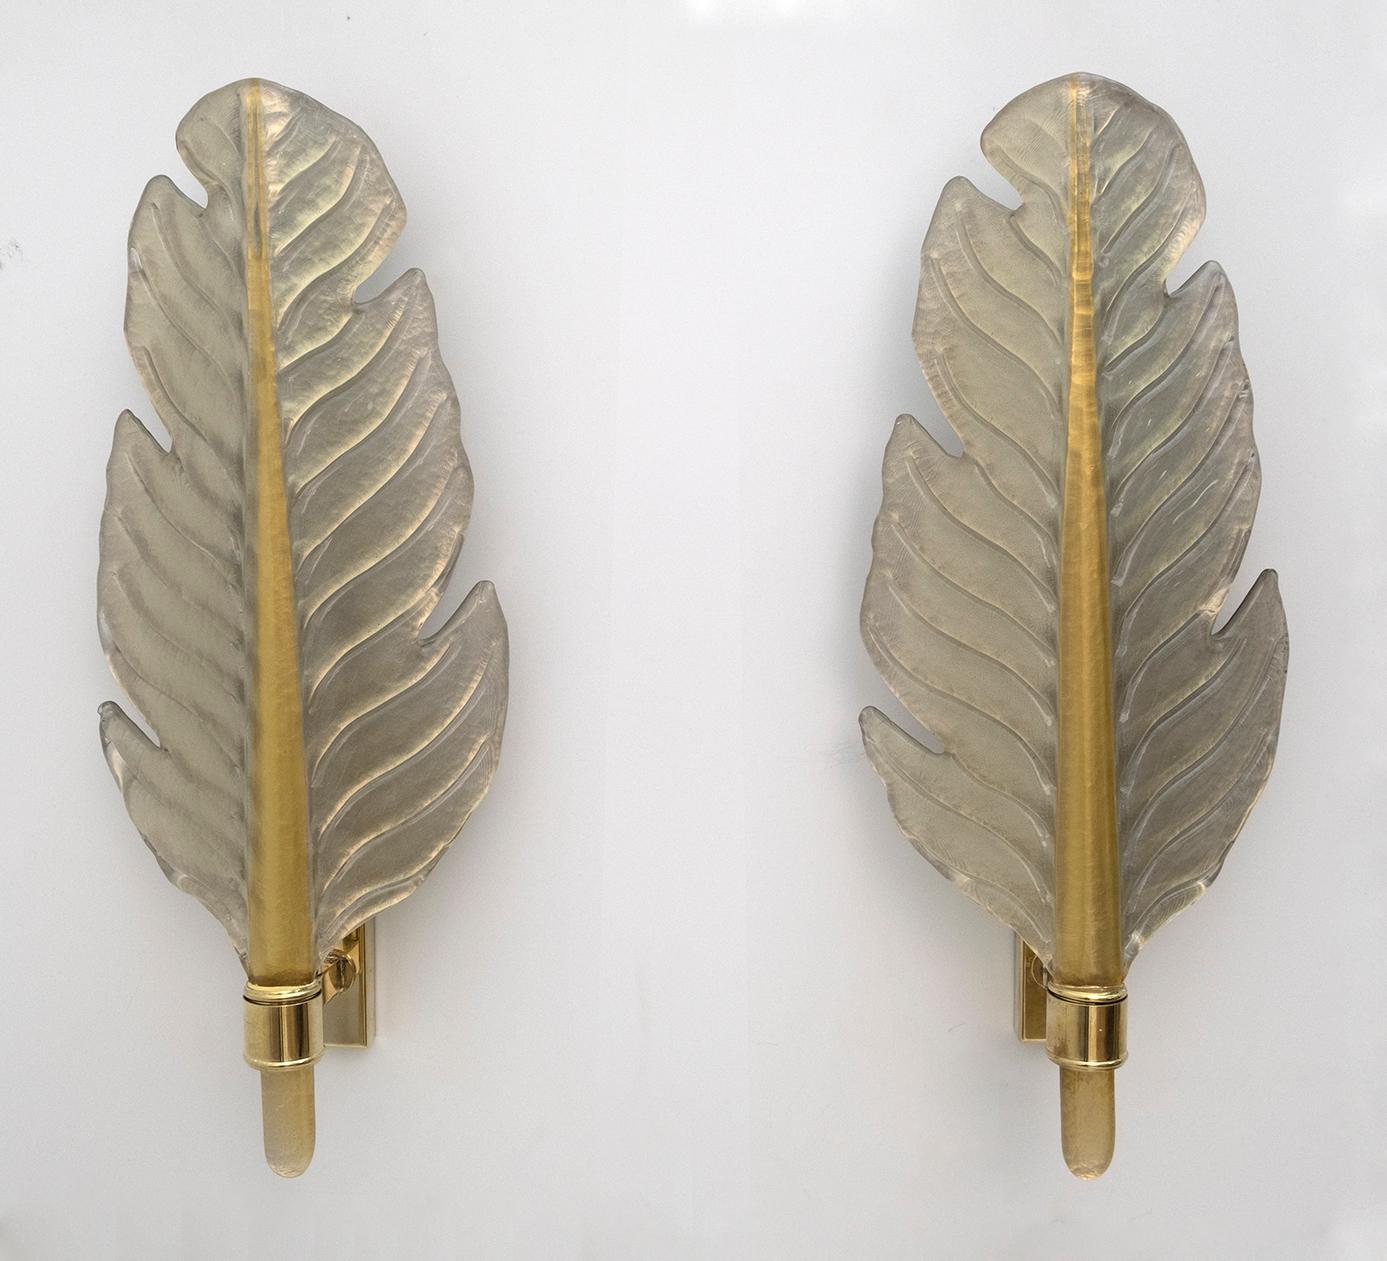 Pair of Mid-Century Modern Murano glass sconces, attributed to Barovier & Toso, Italy, 1980s. The wall lights have brass supports; Murano glass has a light brown color and gold leaf inclusions. The sconces have one light each and can be rewired for